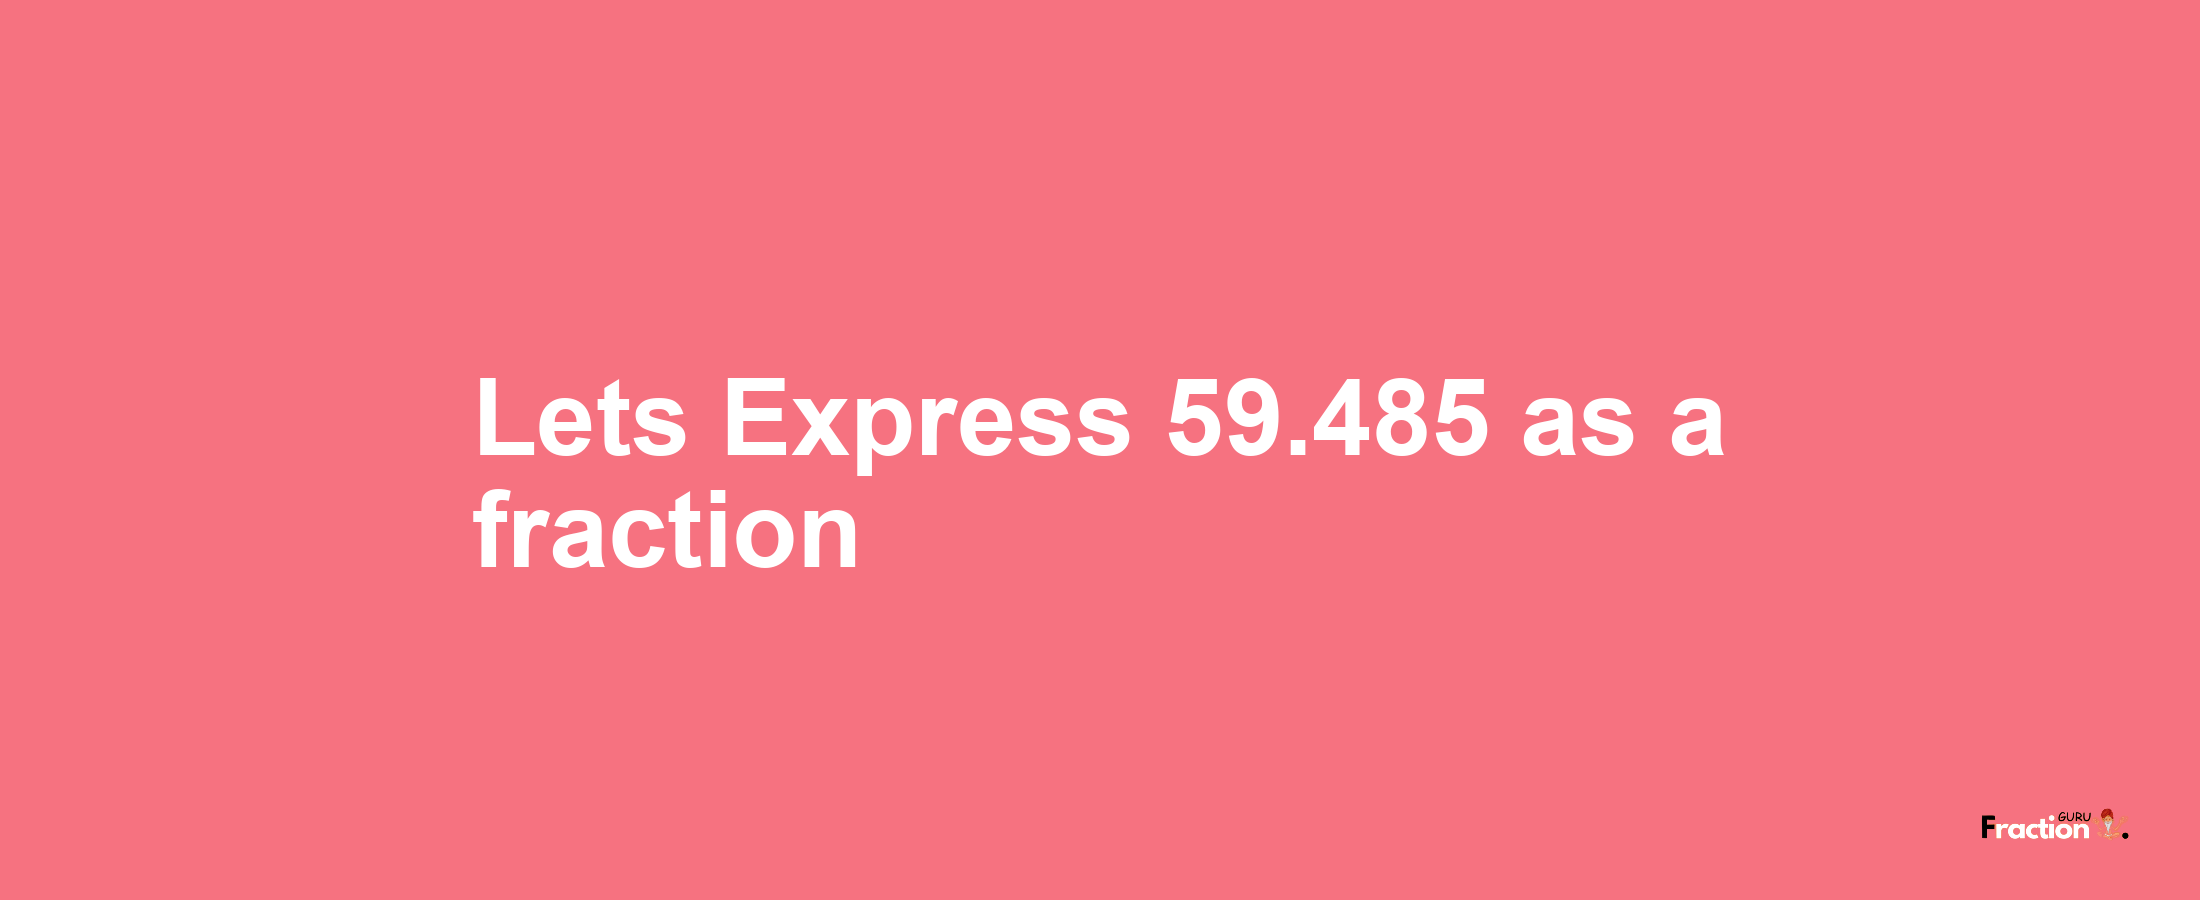 Lets Express 59.485 as afraction